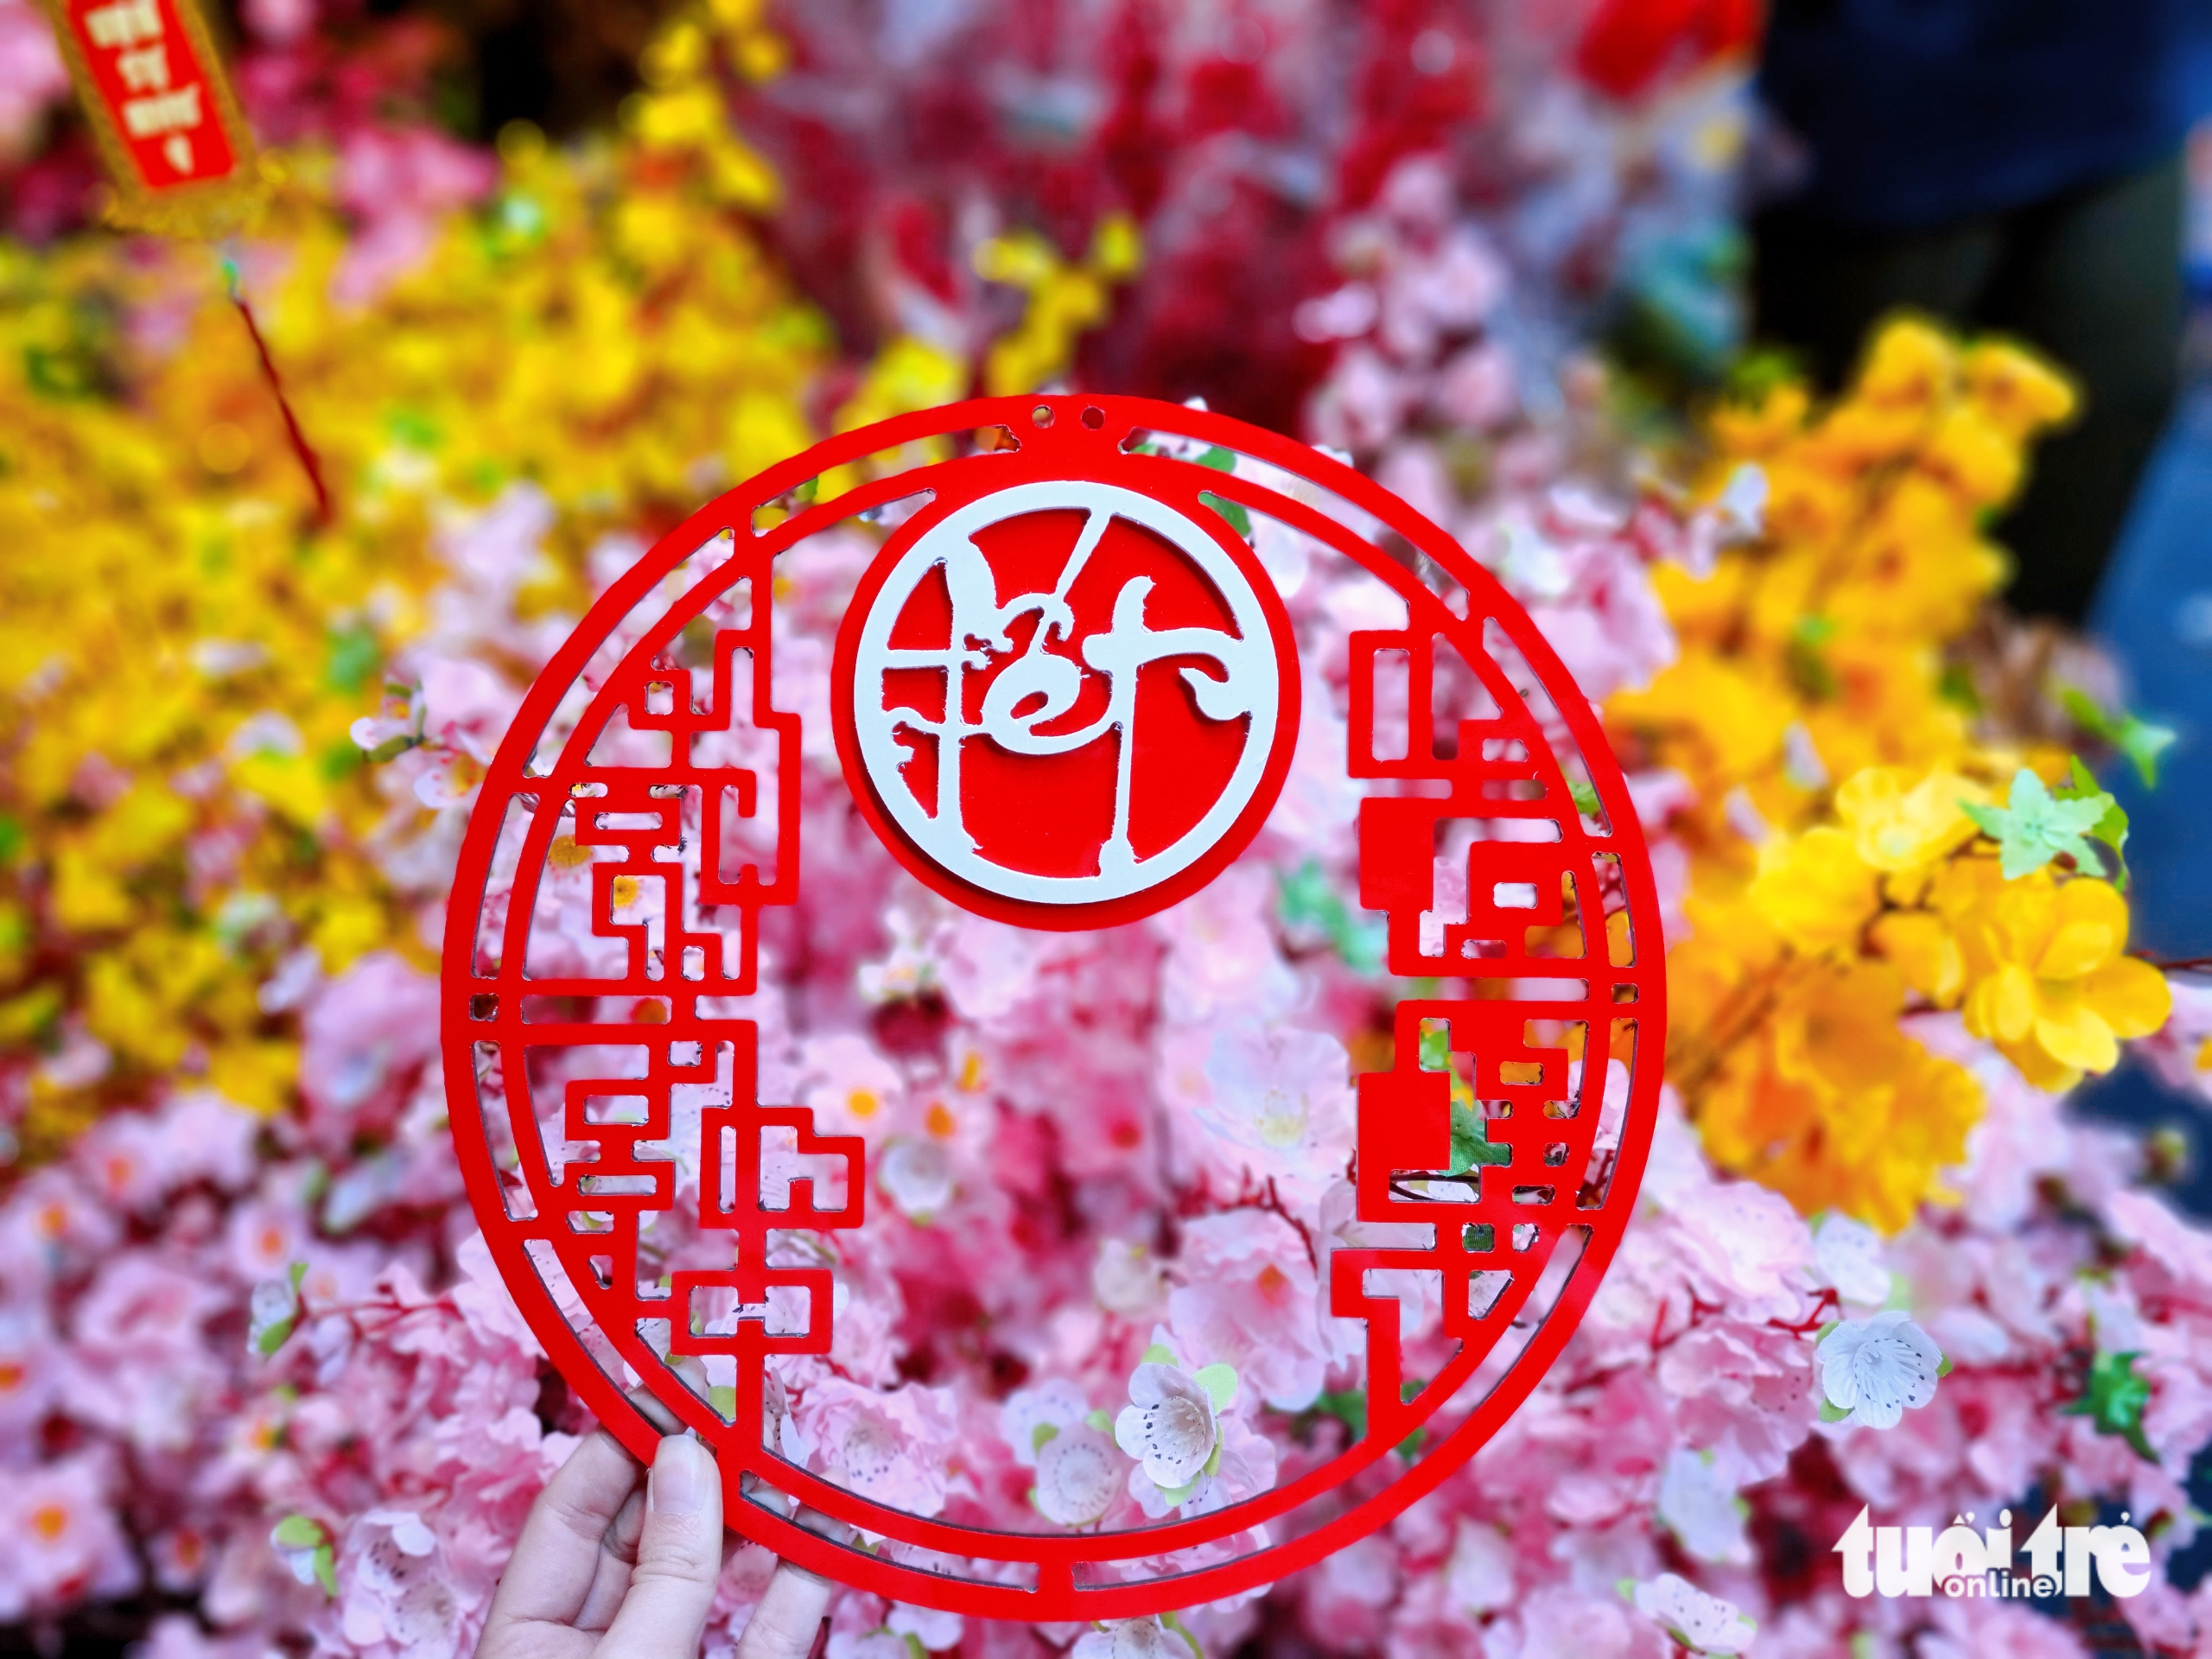 A Tet decoration is put up for sale at a store on Hai Thuong Lan Ong Street in District 5, Ho Chi Minh City. Photo: Nhat Xuan / Tuoi Tre